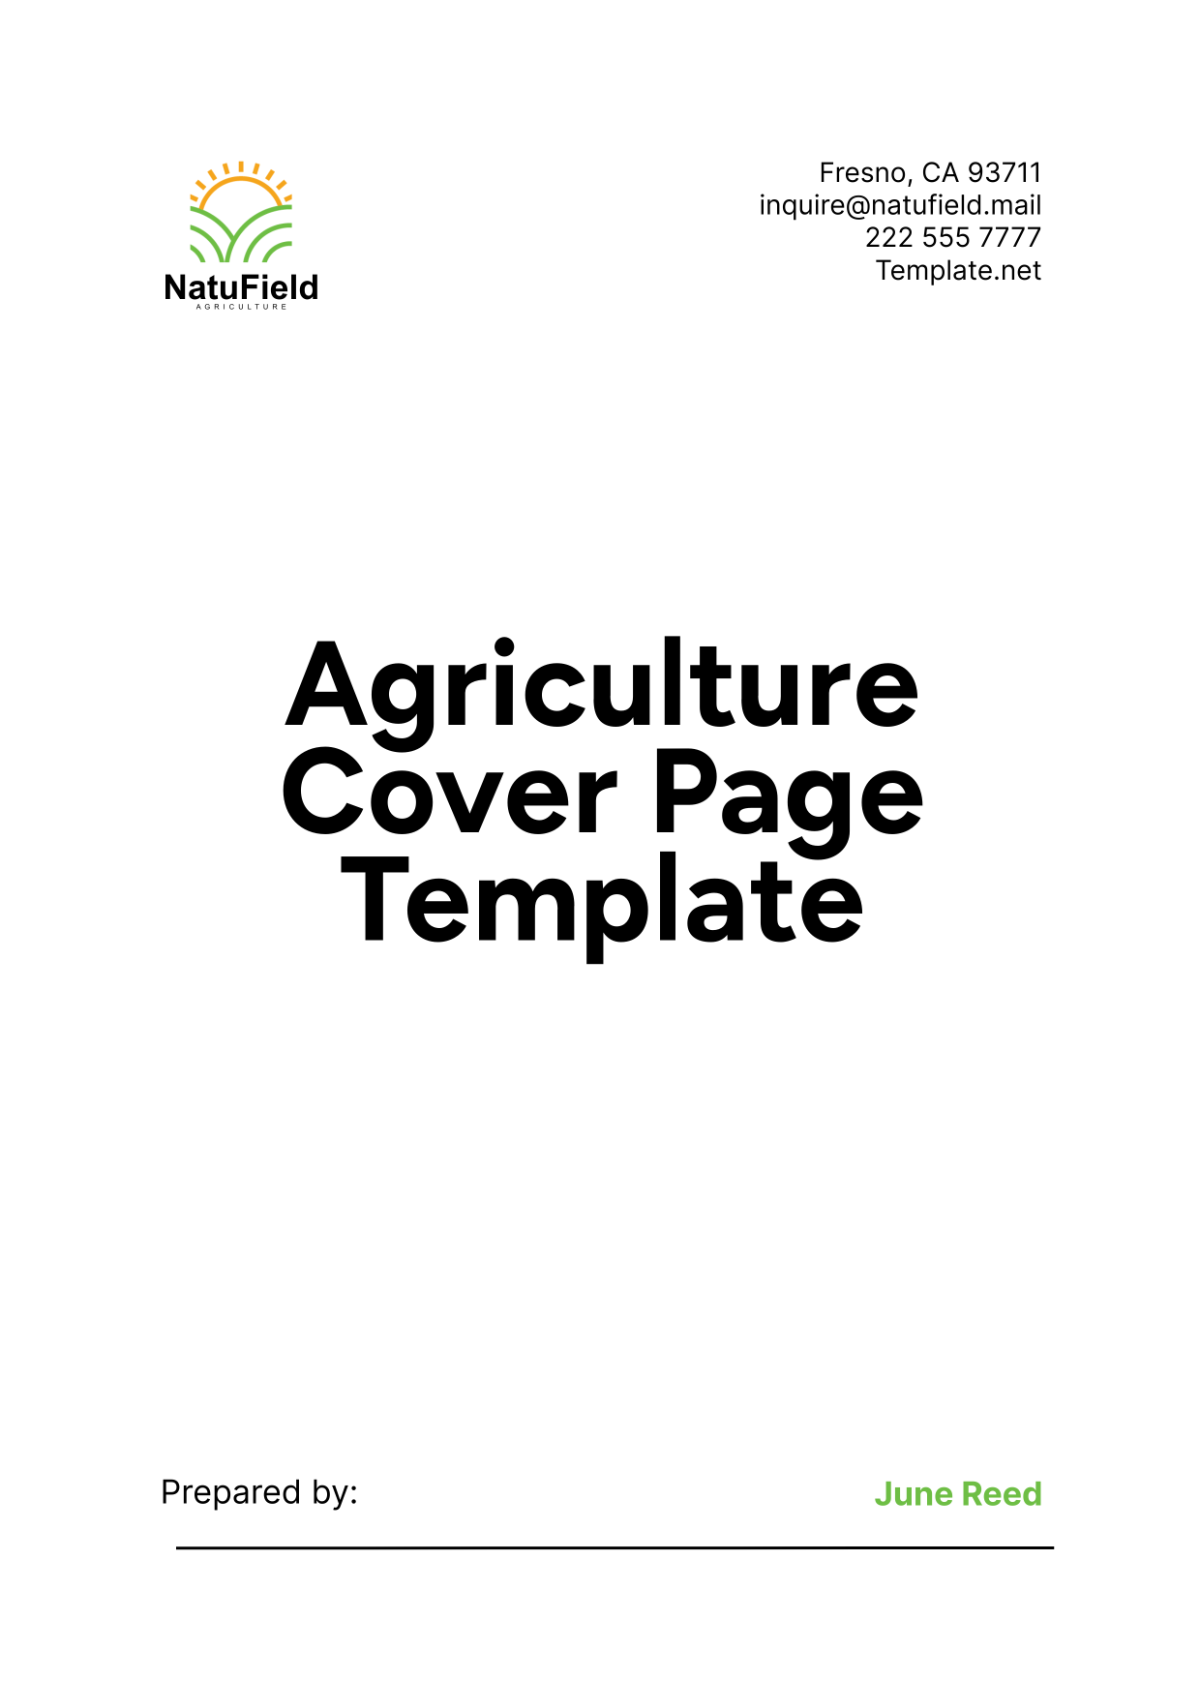 Agriculture Cover Page